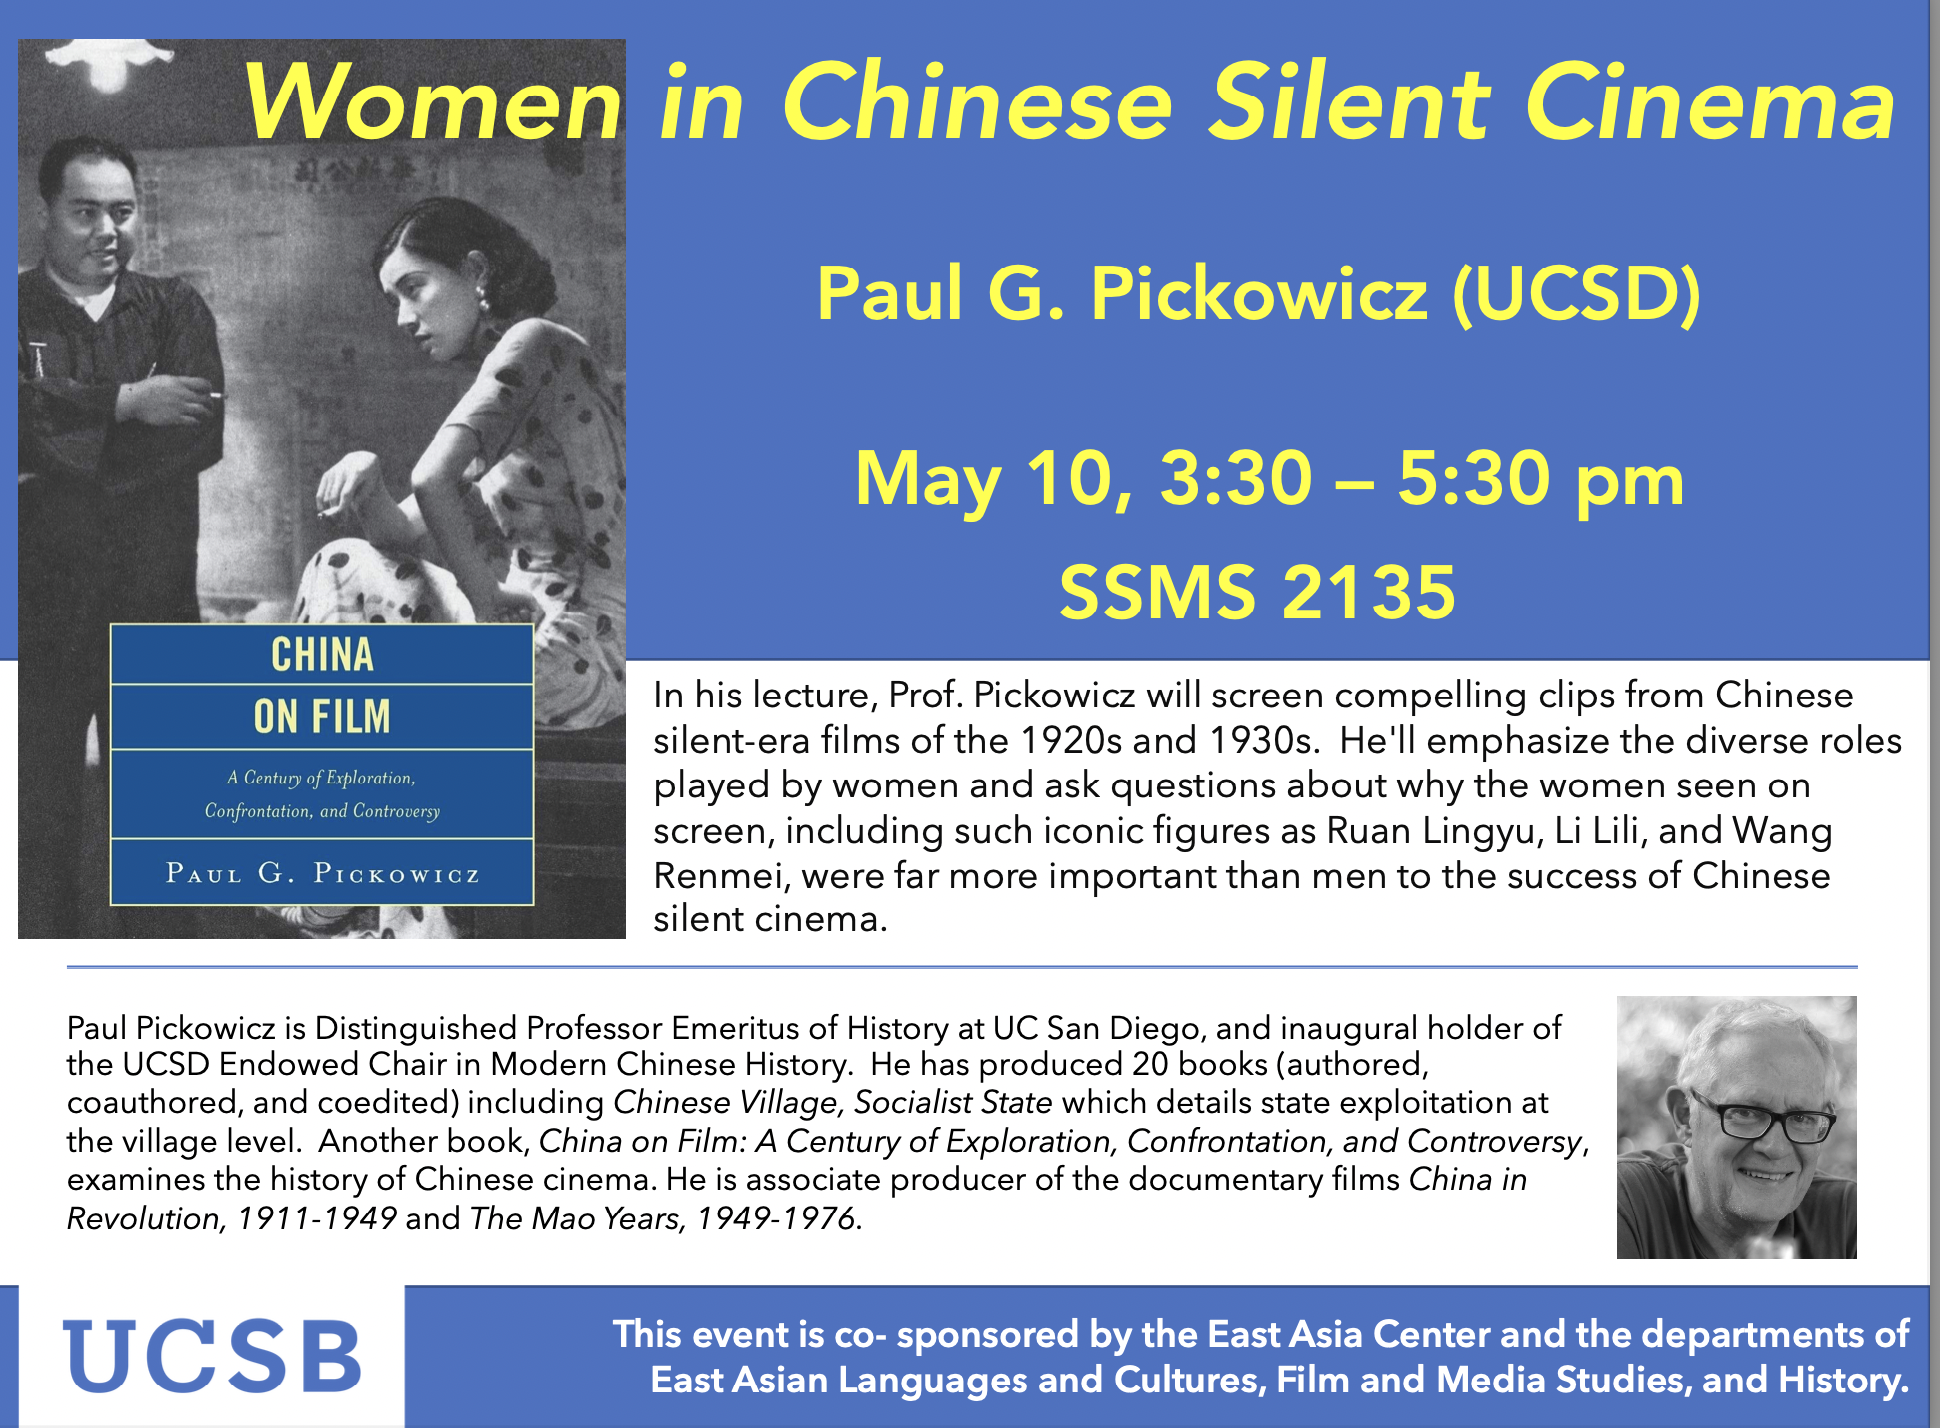 Flyer for "Women in Chinese Silent Cinema" by Paul G. Pickowicz on May 10 from 3:30-5:30PM in SSMS 2135